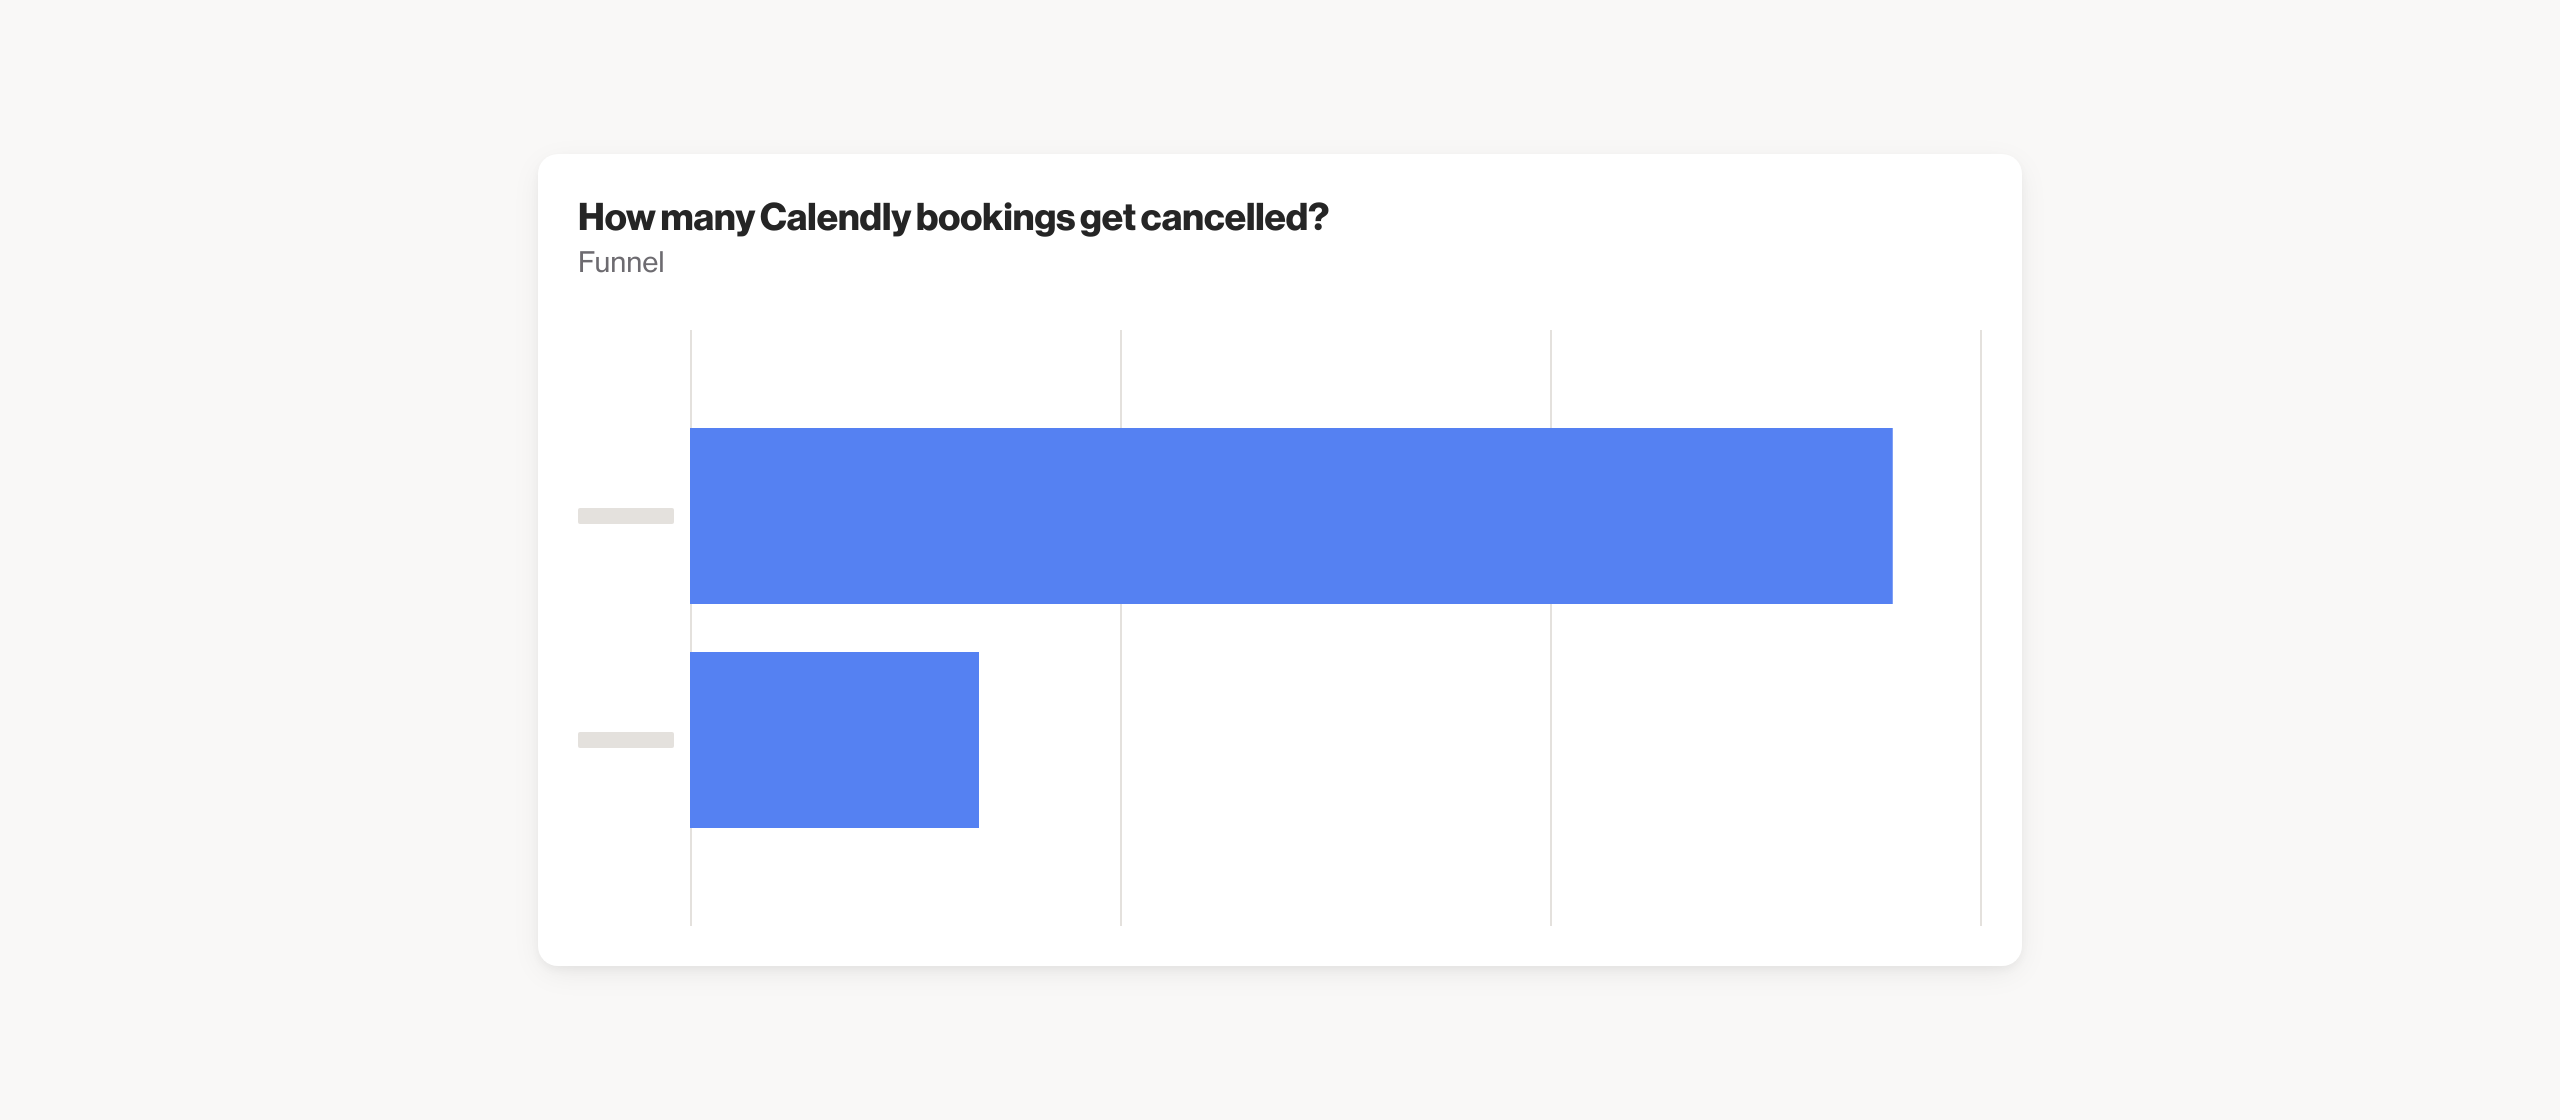 How many Calendly bookings get cancelled?